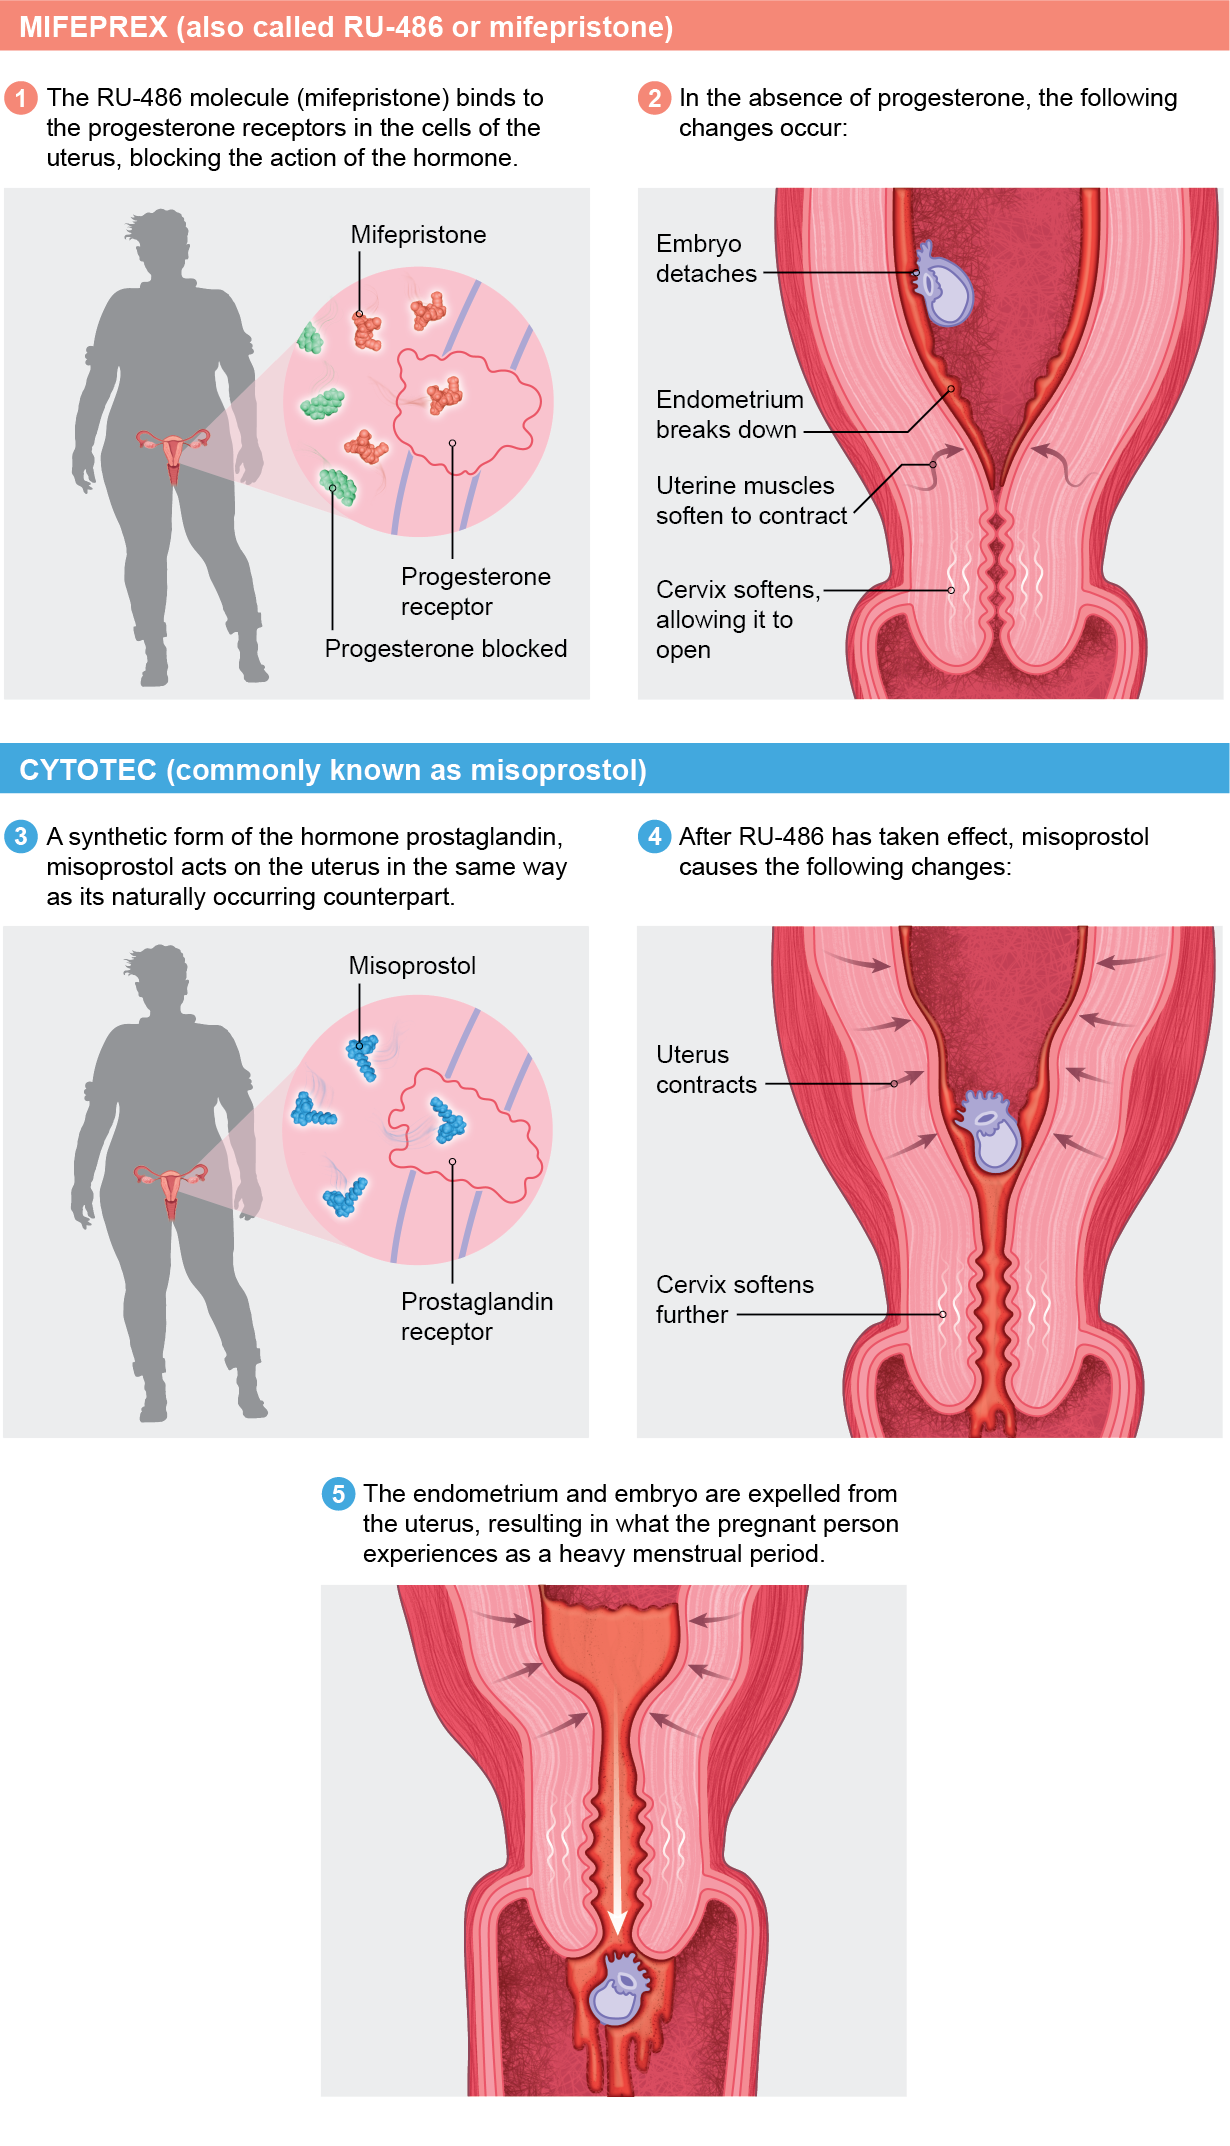 Graphic shows how mifepristone and misoprostol act on the uterus and cervix to expel the embryo and endometrium.